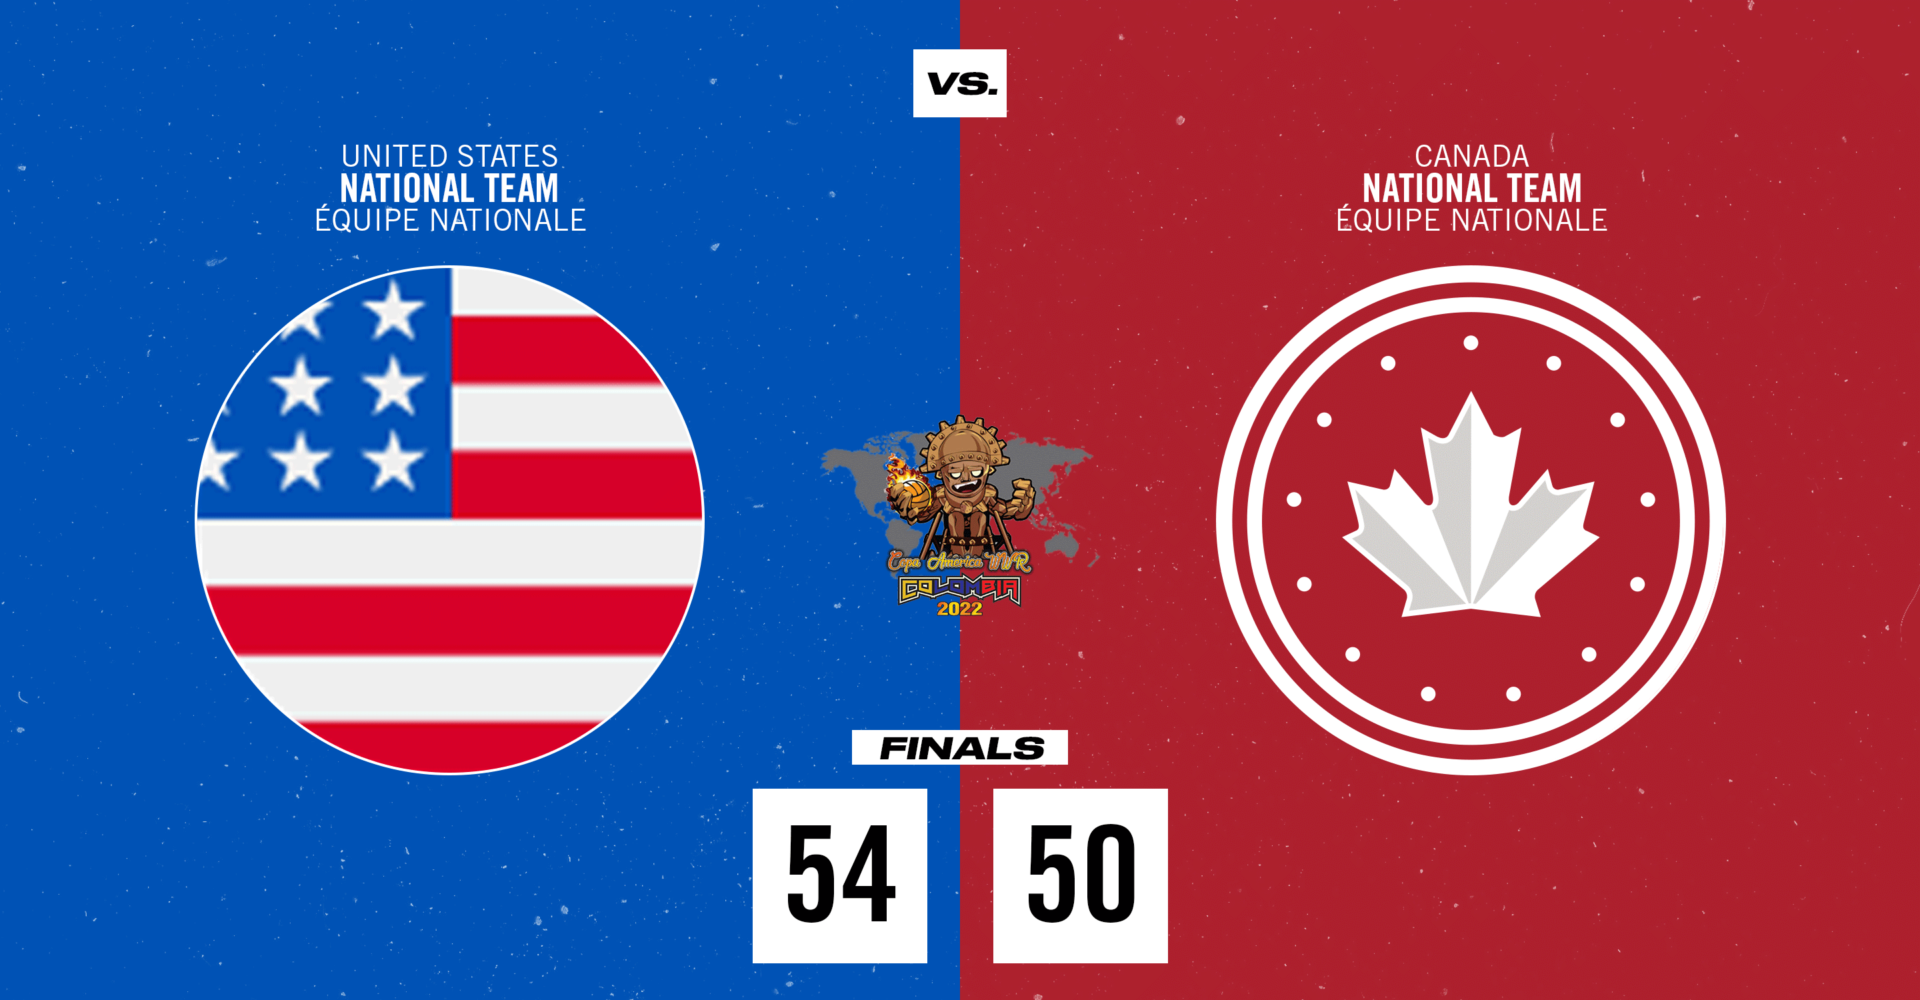 Canada finishes with Silver in 2022 Americas Championship after 50-54 loss to USA in Final